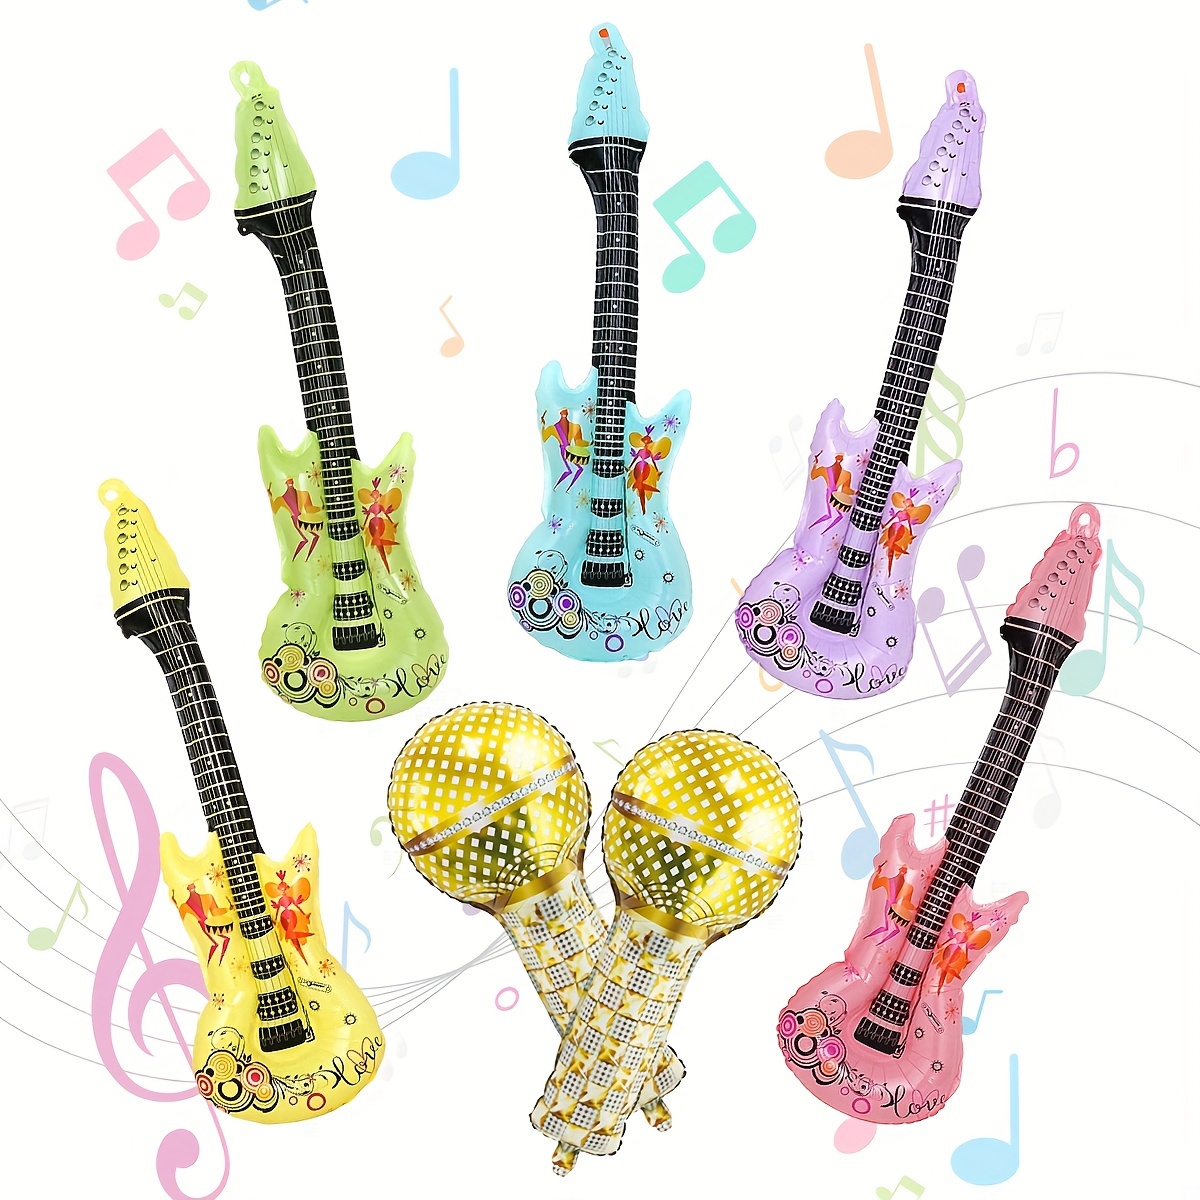 

5-piece Rock & Roll Inflatable Guitar Balloons - Multicolor Aluminum Foil, Perfect For Disco Parties, Birthdays, Music Themed Events Foil Balloons Balloons Decoration Set